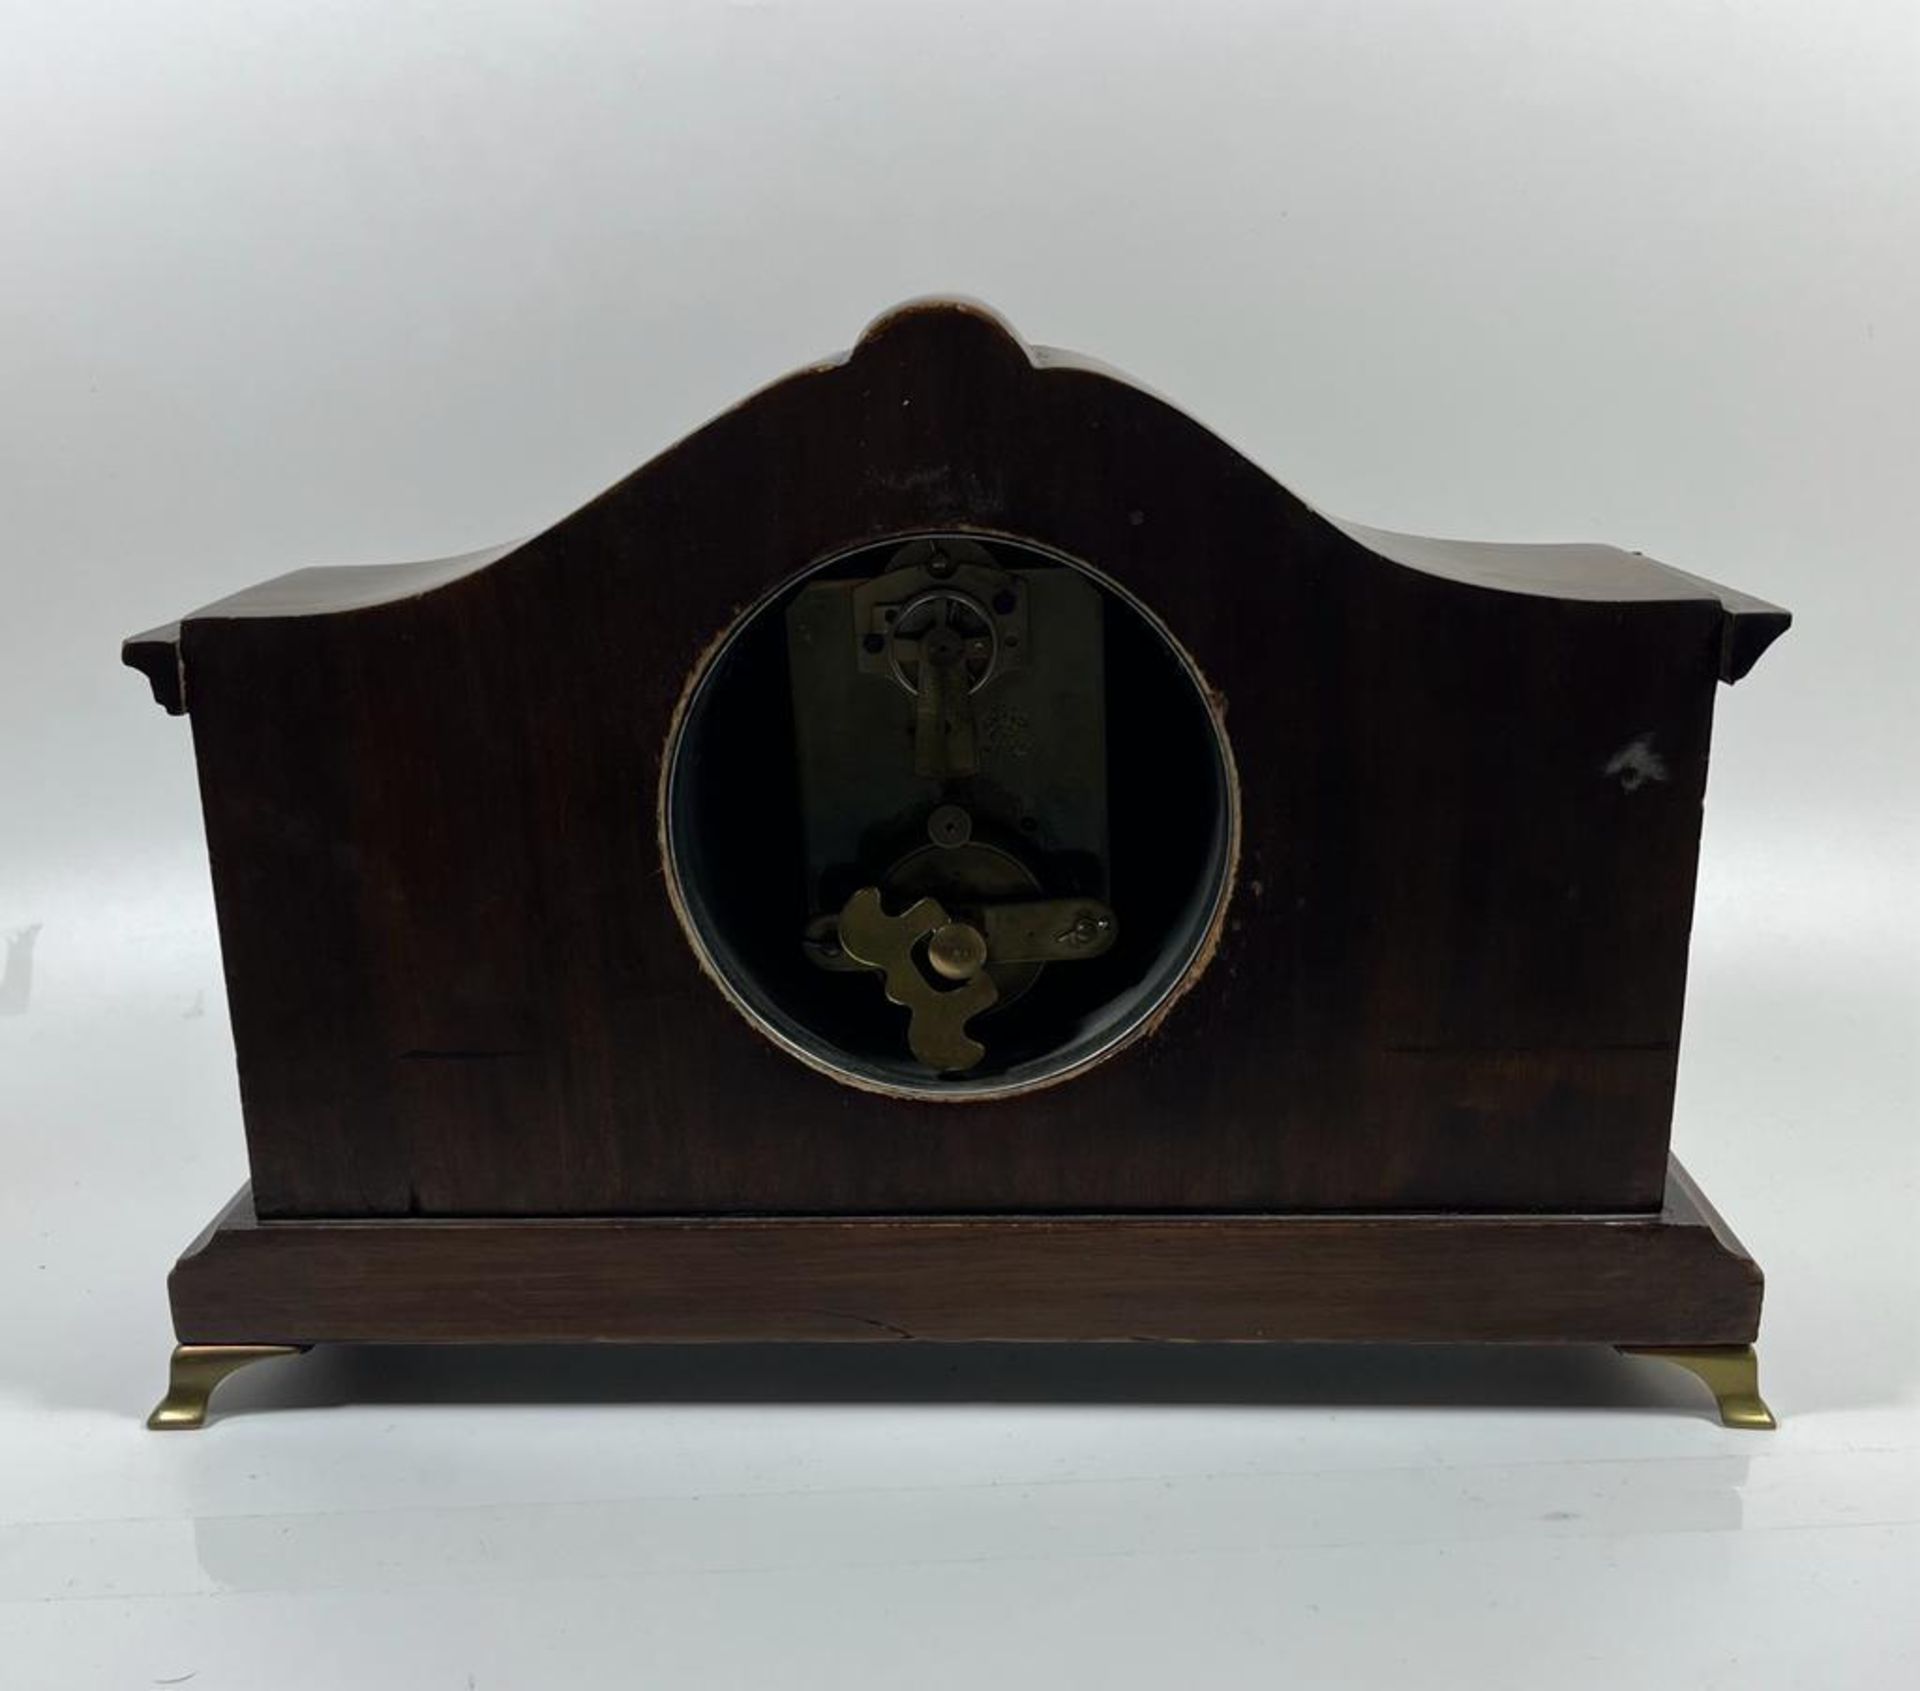 A MAHOGANY MANTLE CLOCK WITH BRASS COLUMNS AND FEET WITH JAPE FRERES MOVEMENT, 19 X 28 CM - Image 2 of 7